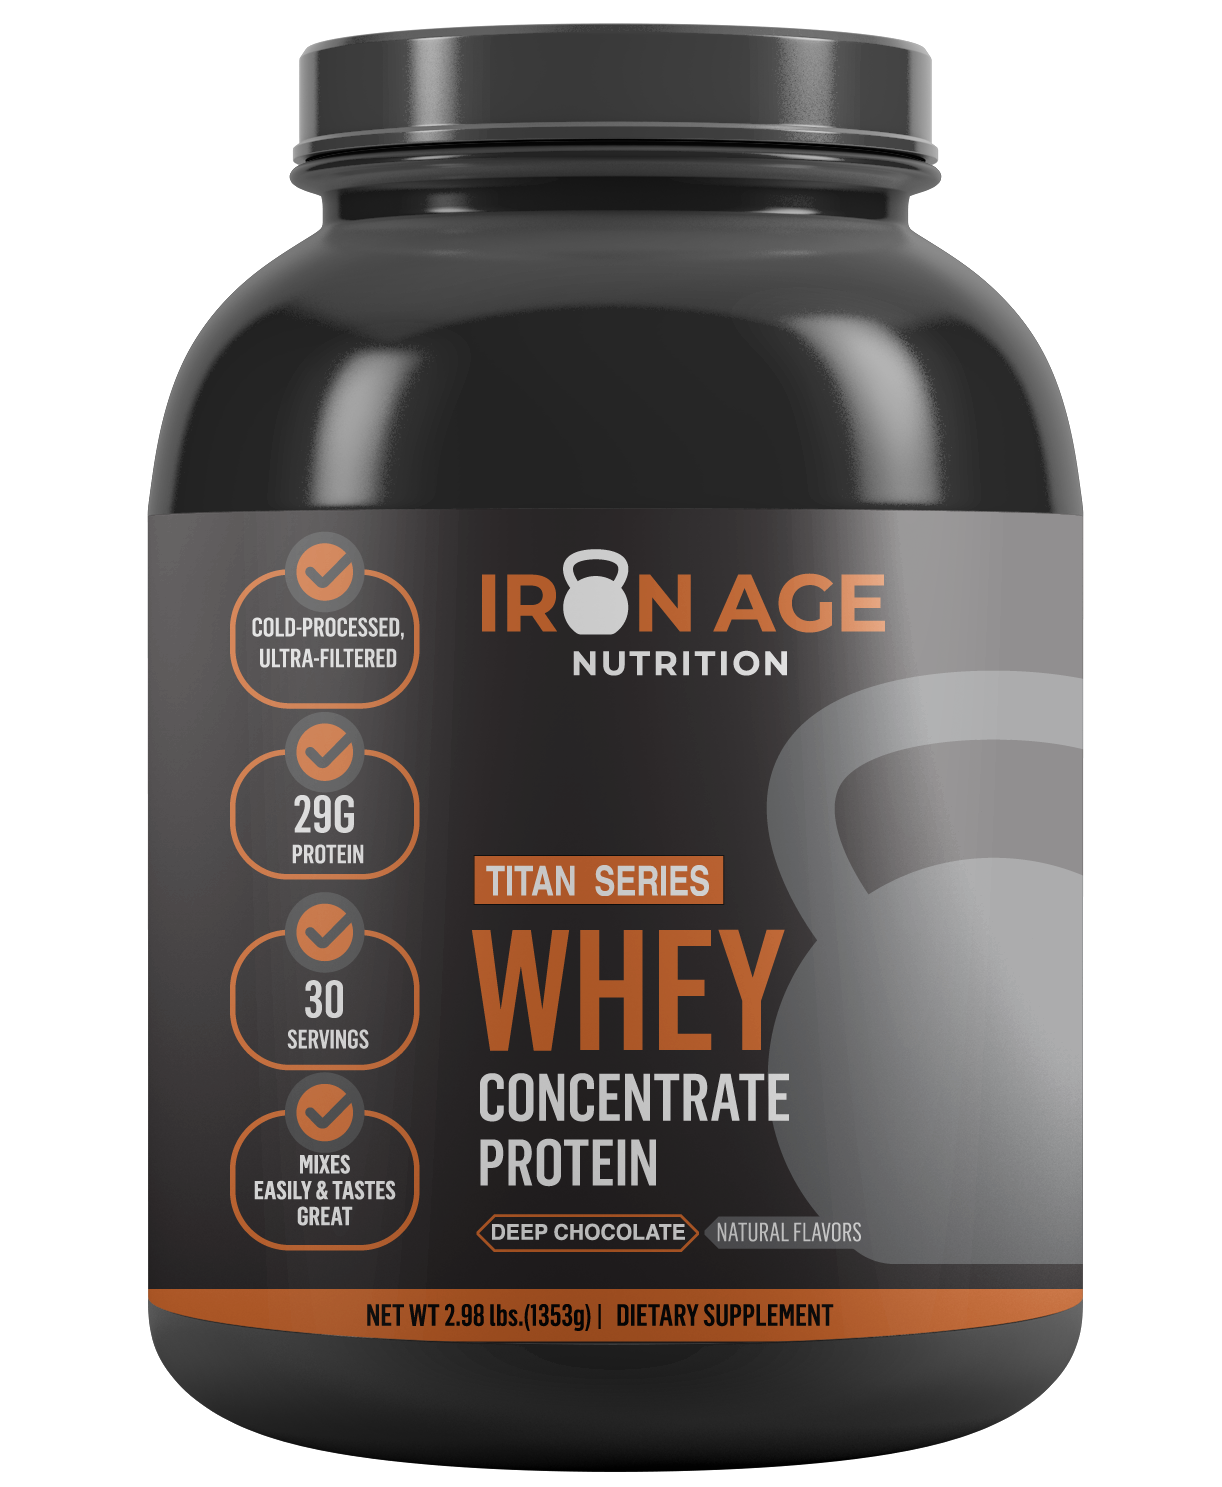 Whey Concentrate, Chocolate - Titan Series